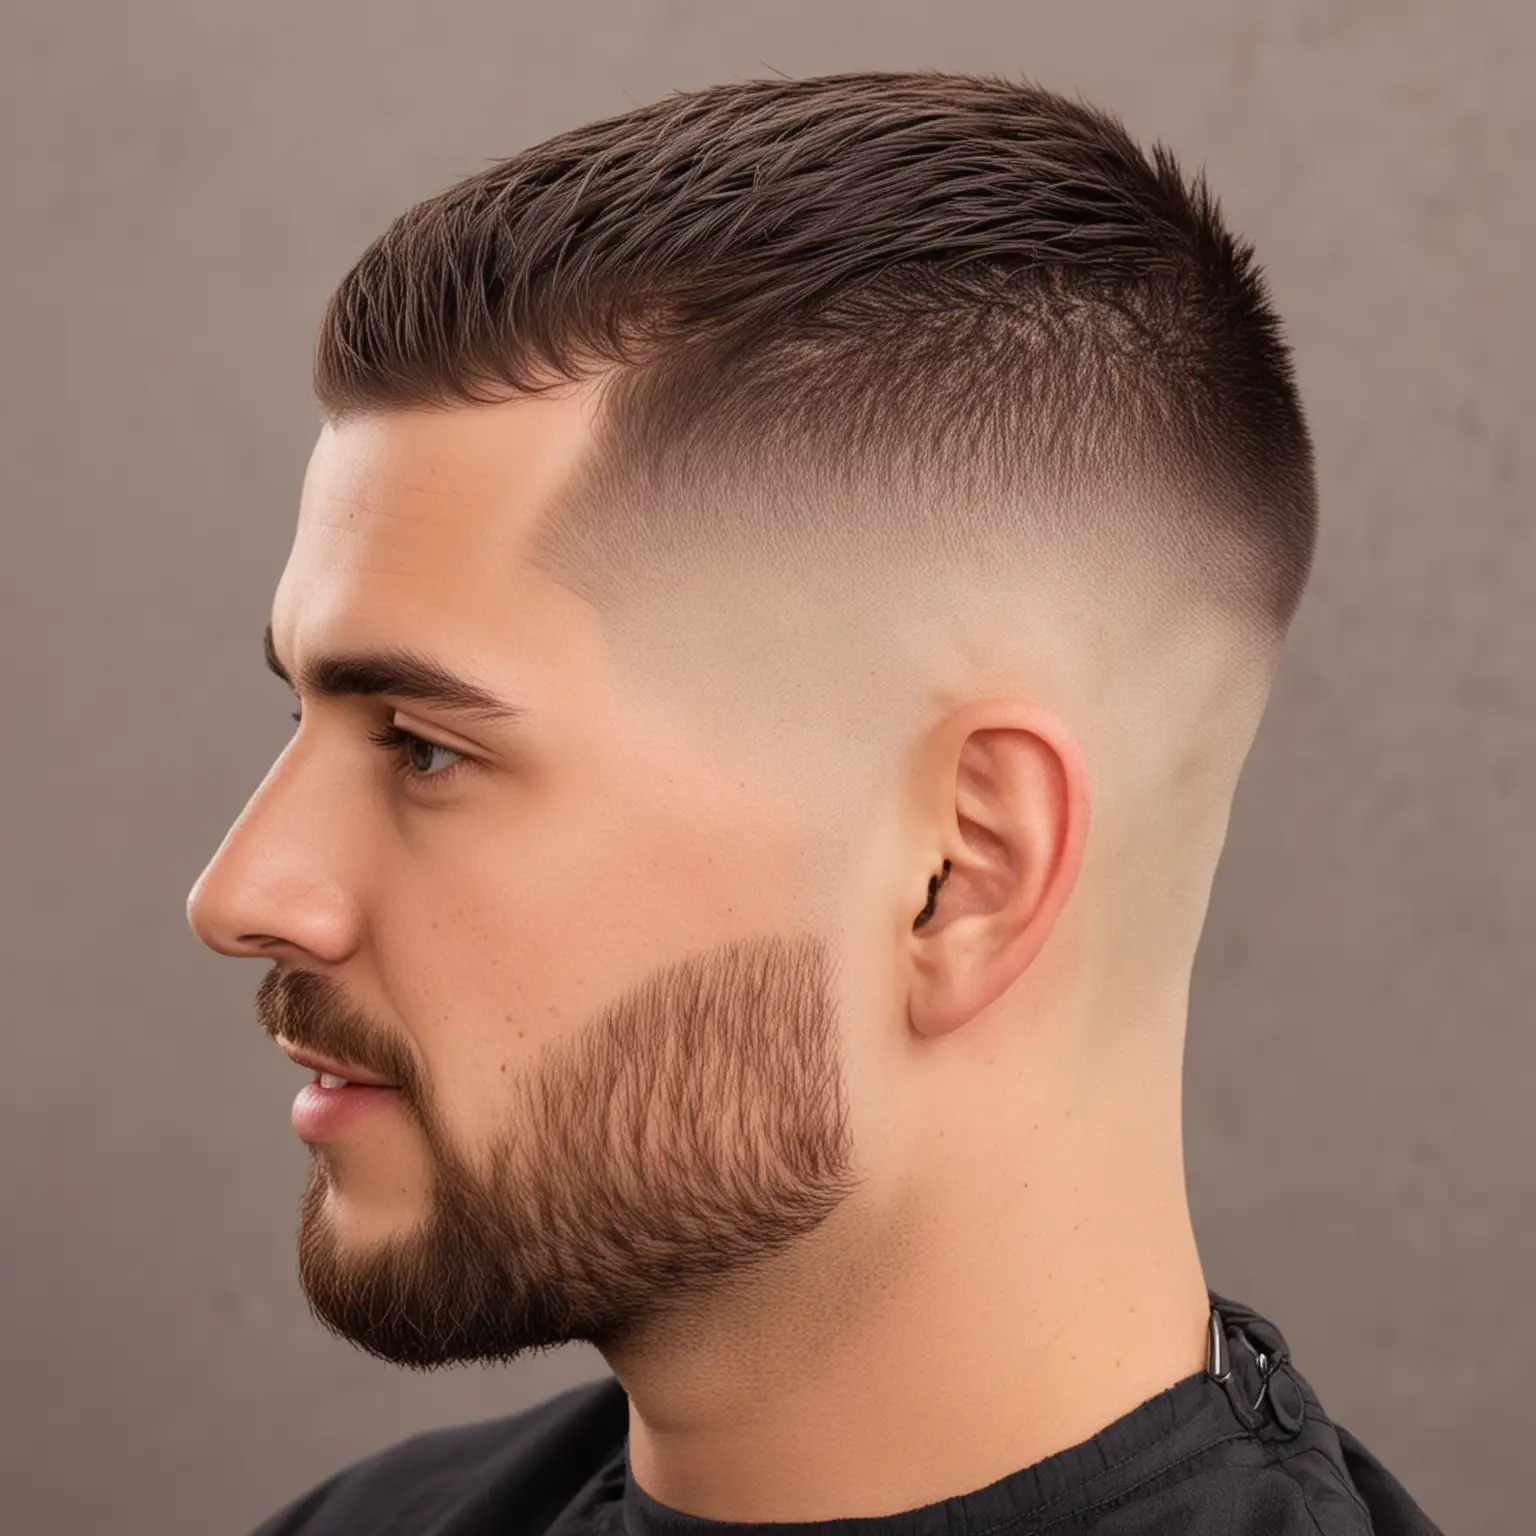 Stylish Man with a Buzz Haircut in Urban Setting